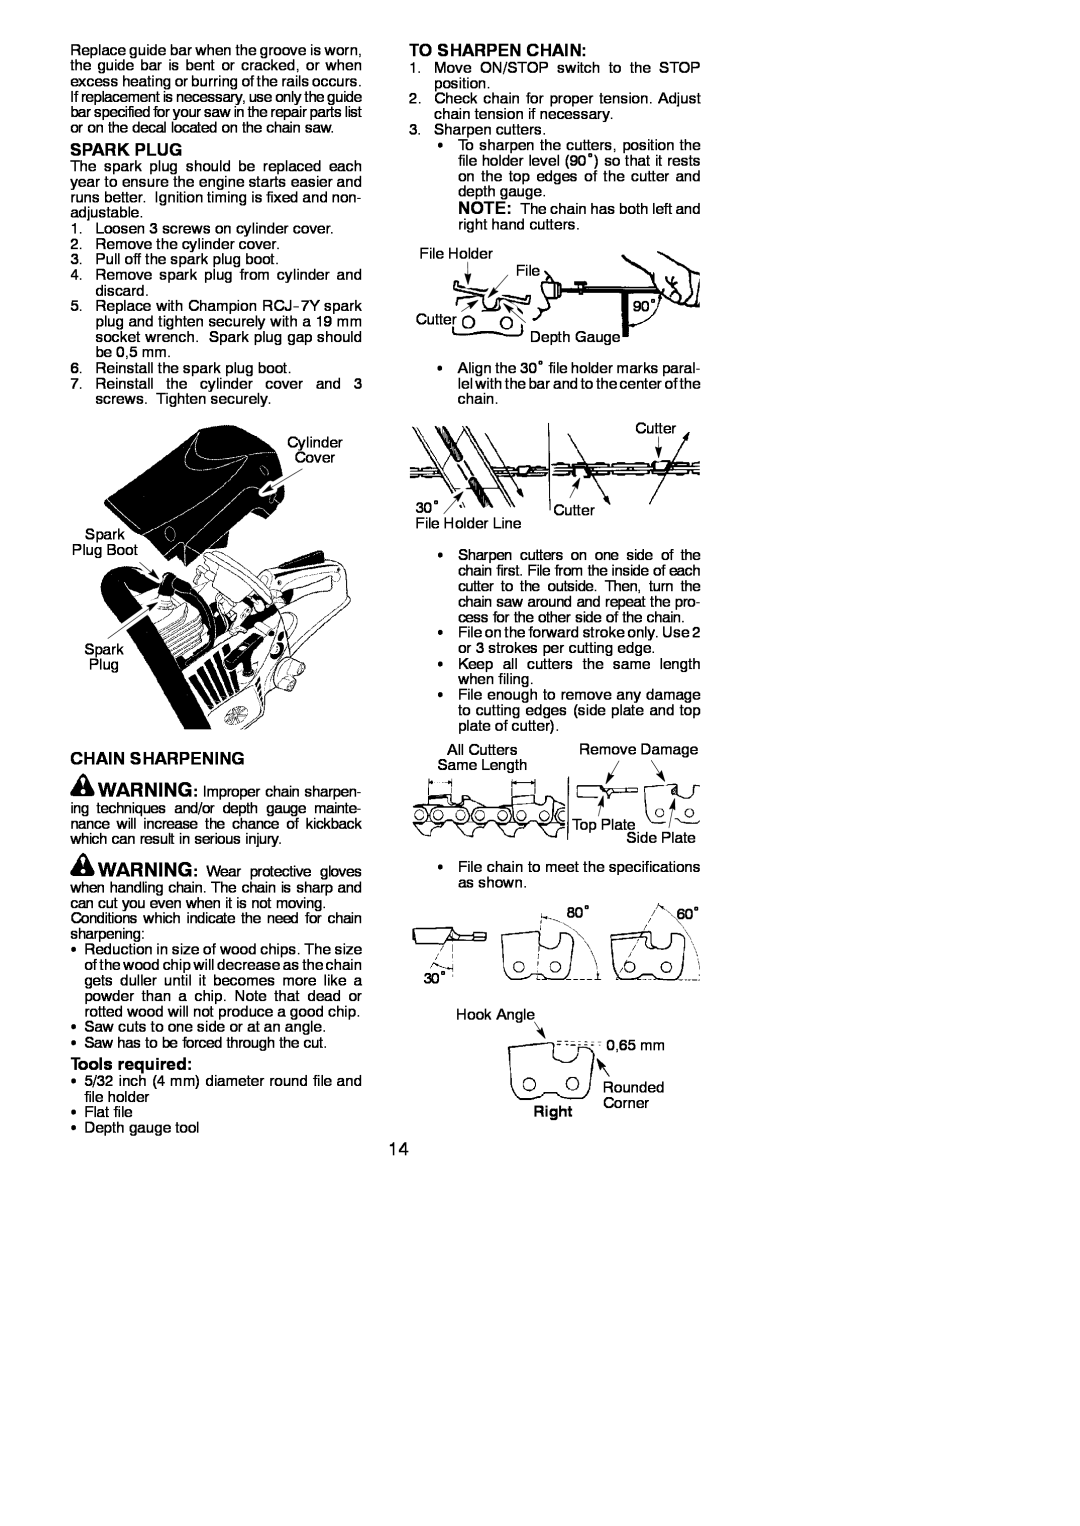 McCulloch MAC 838 instruction manual Spark Plug, To Sharpen Chain, Chain Sharpening, Tools required, Right Corner 